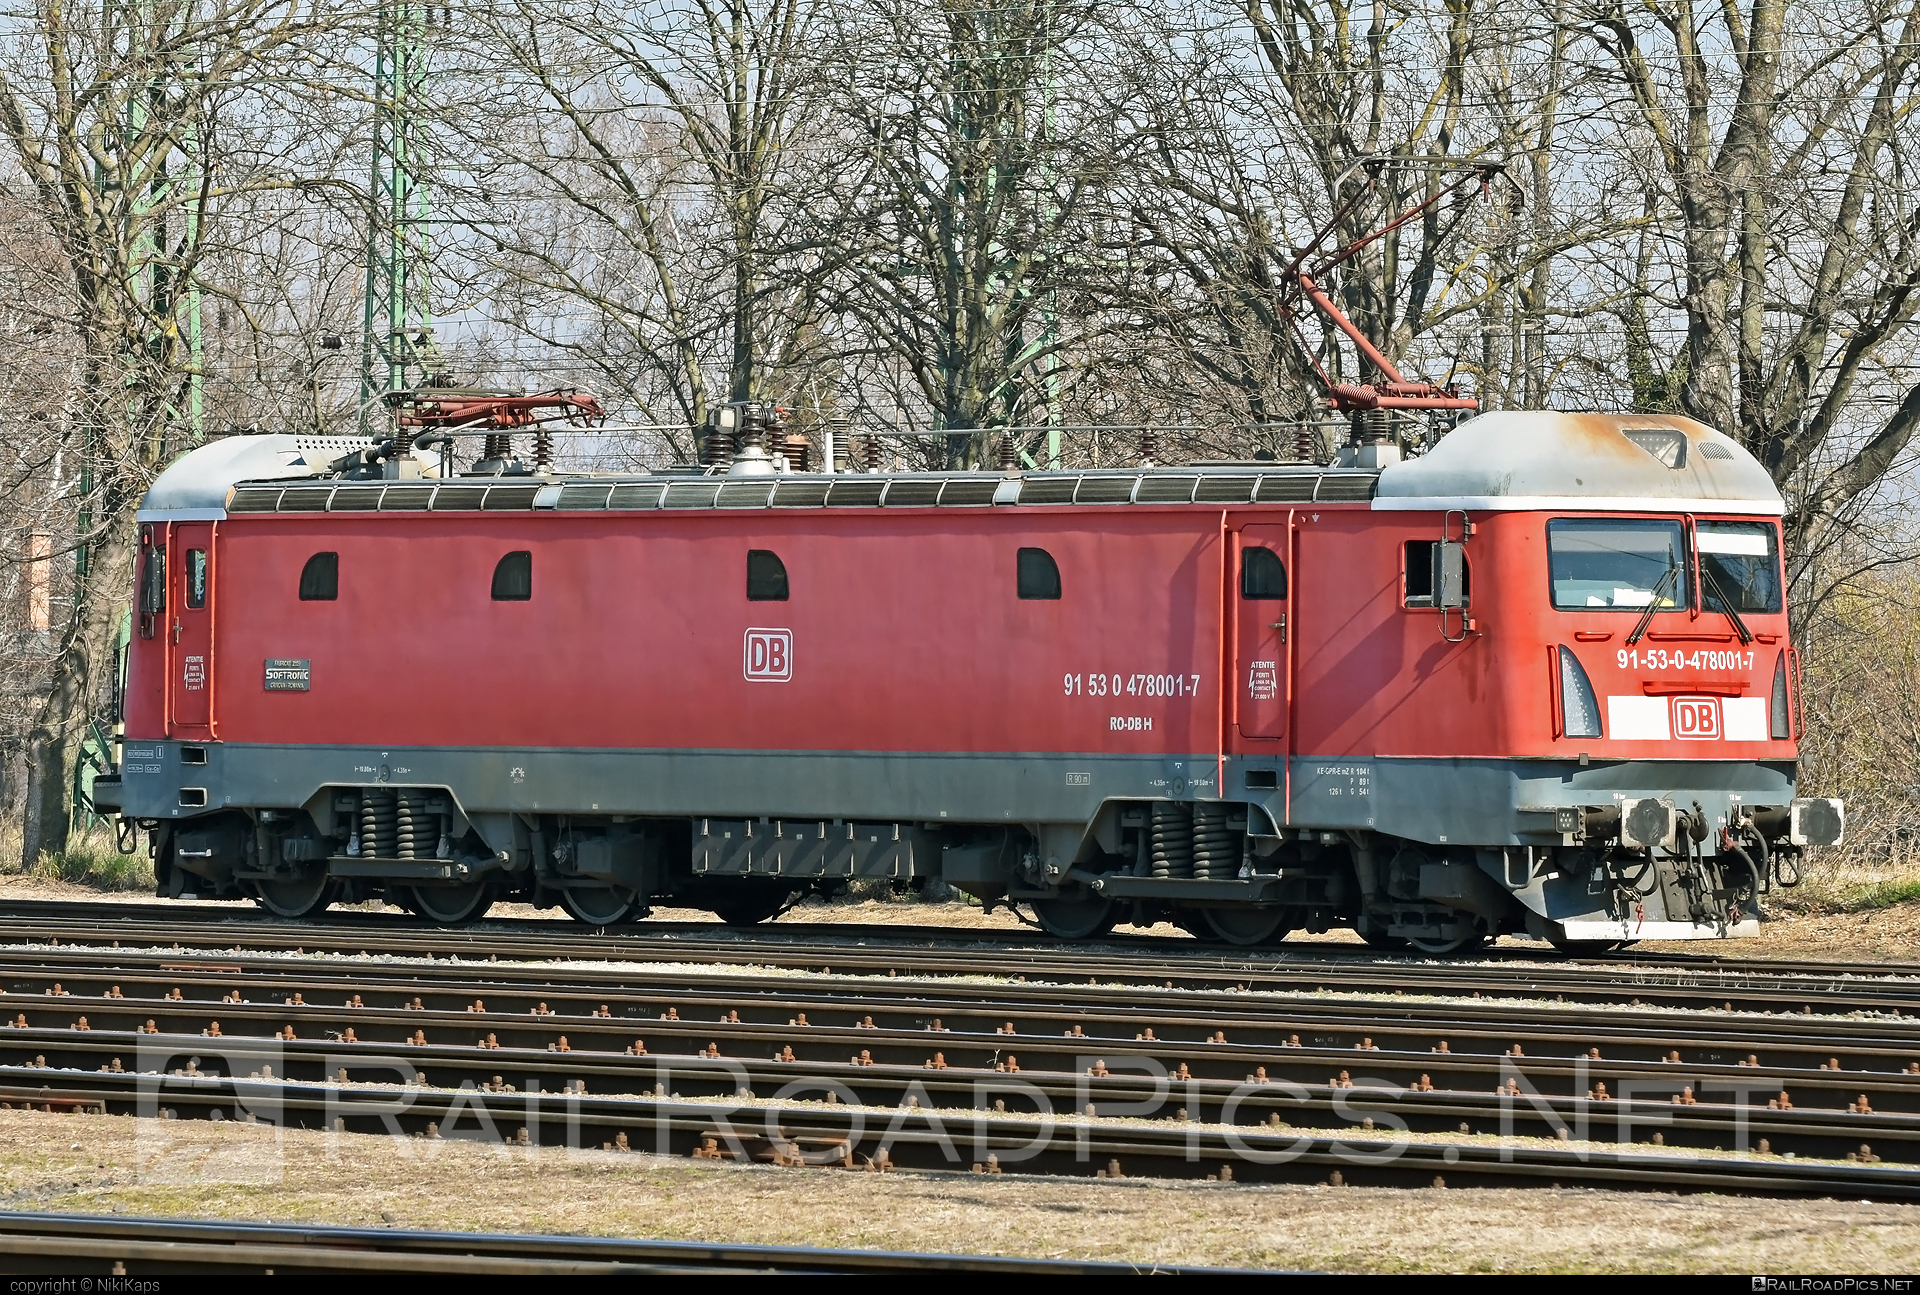 Softronic Phoenix - 478 001-7 operated by DB Cargo Hungária Kft #db #dbcargo #dbcargohungaria #dbh #softronic #softronicphoenix